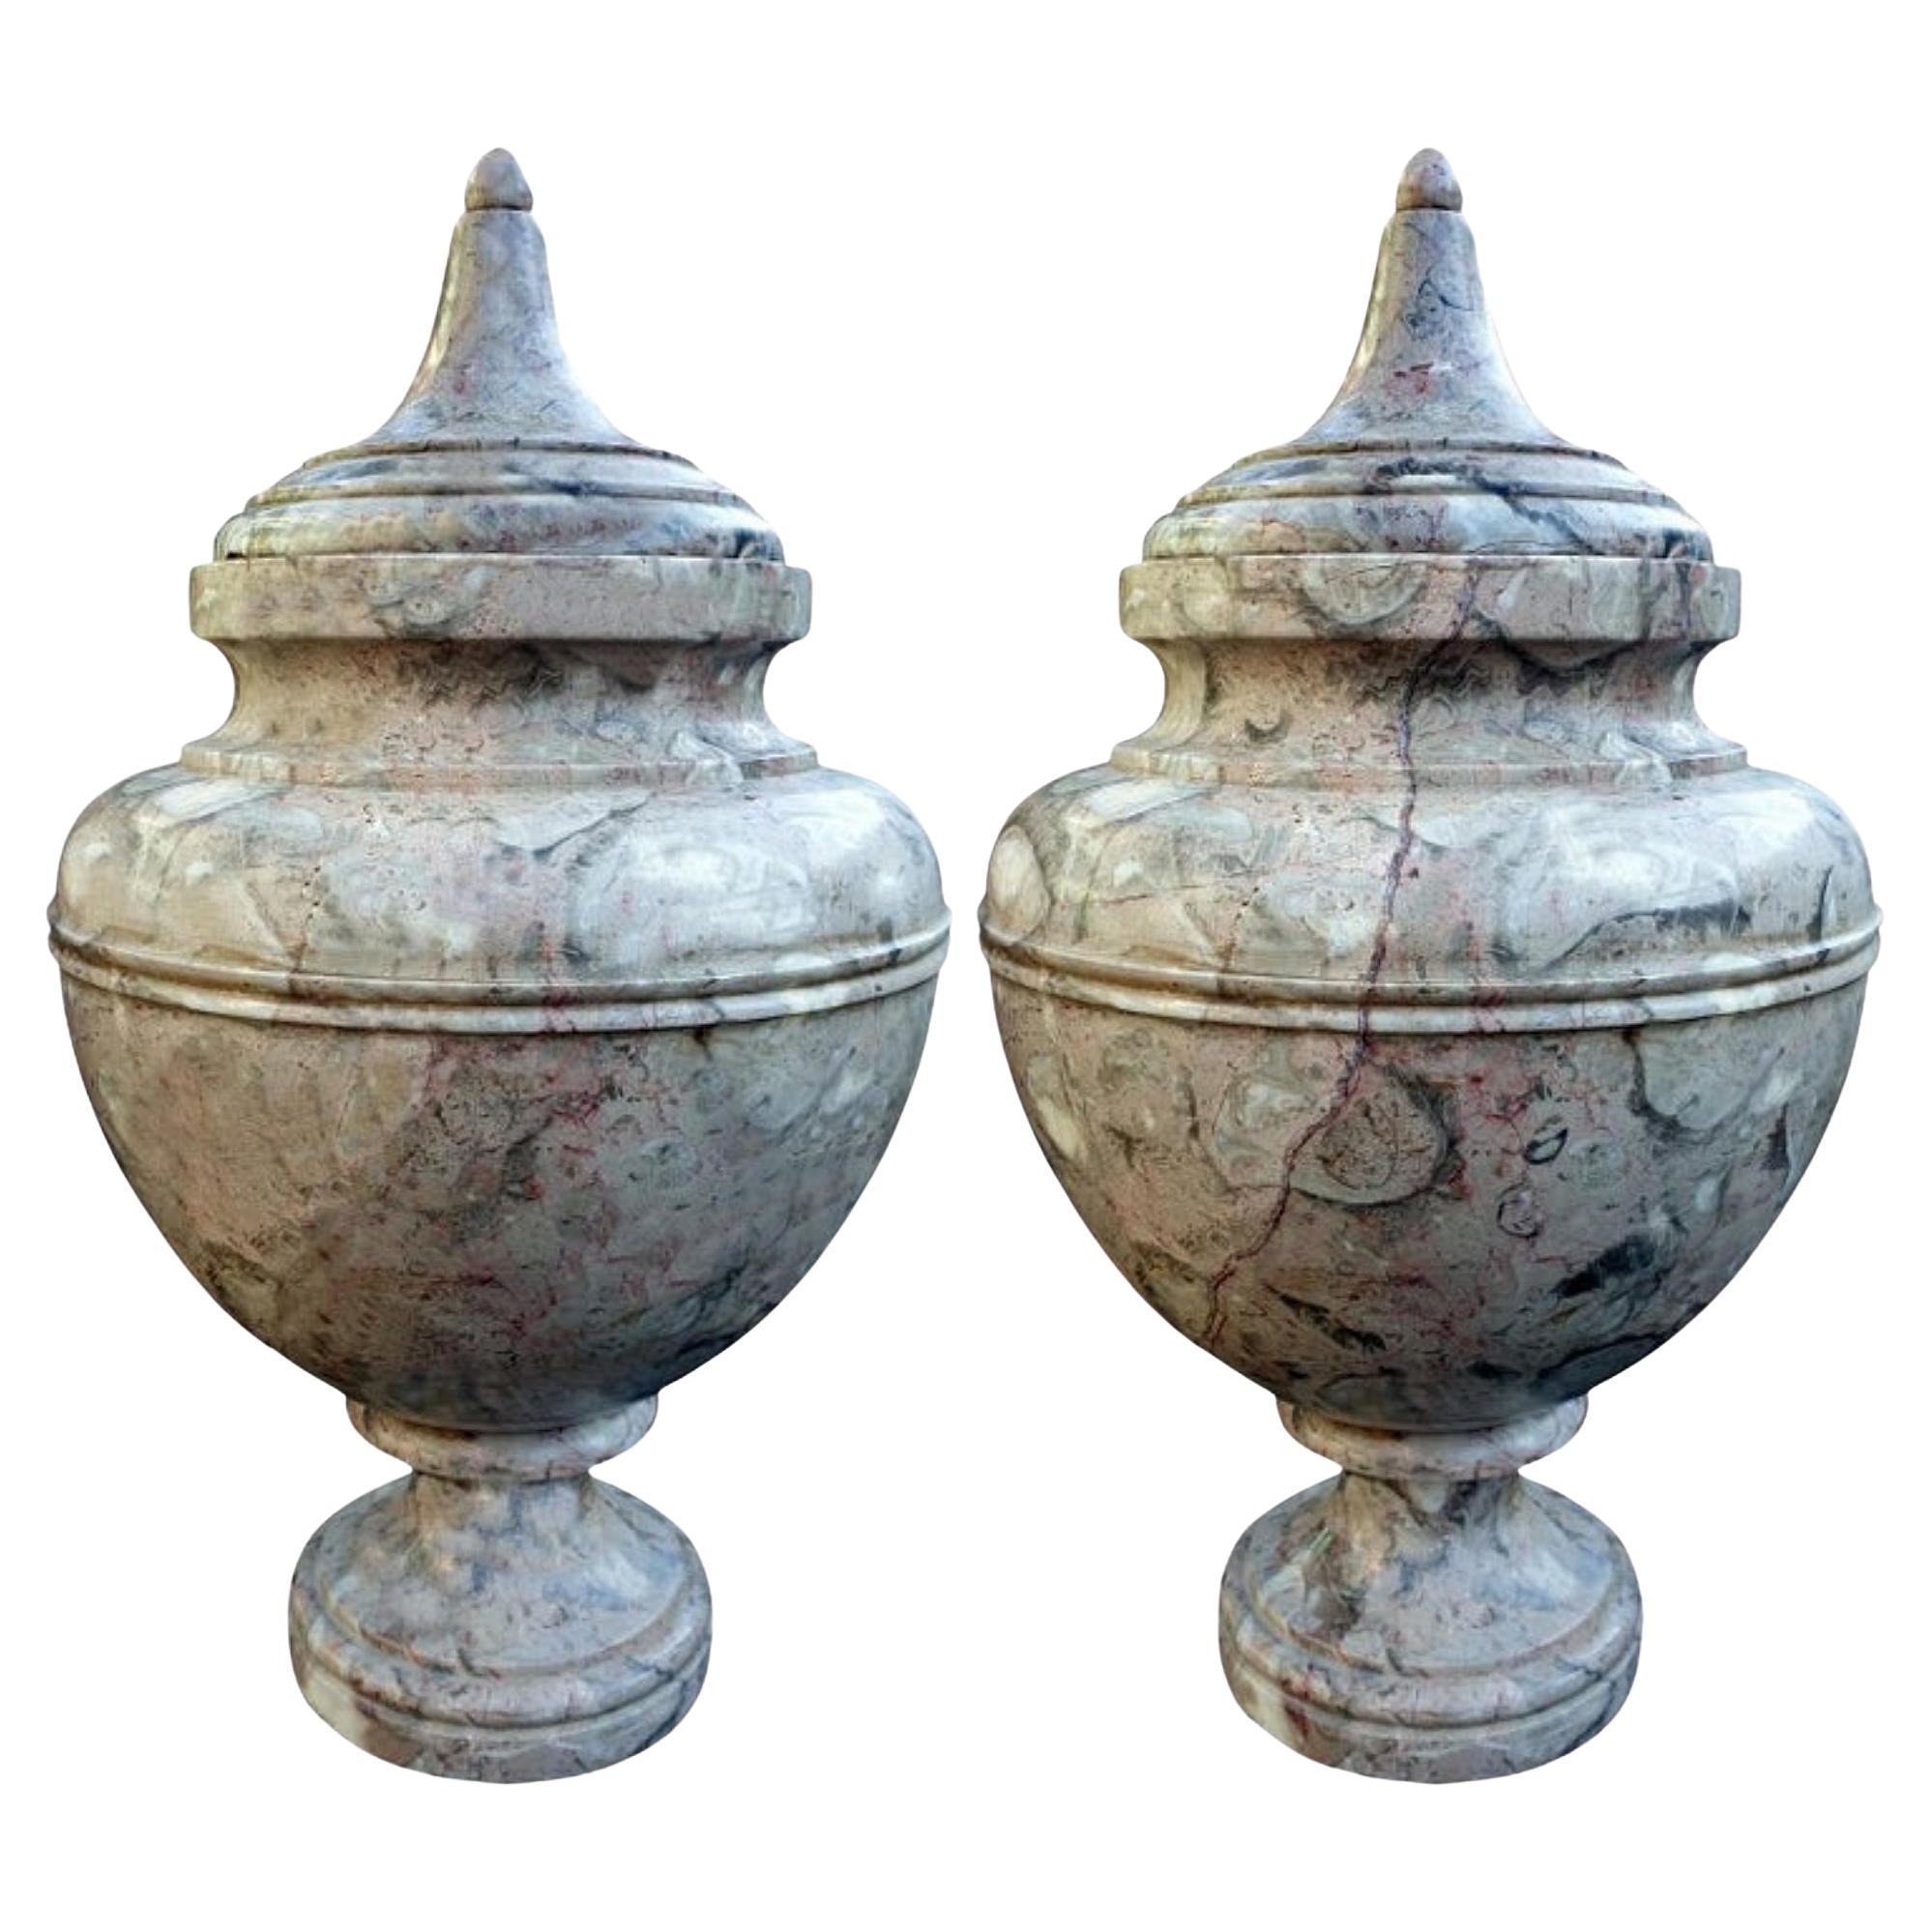 Amazing Pair of Turned Vases in Italian Lumachella Marble, Early 20th Century For Sale